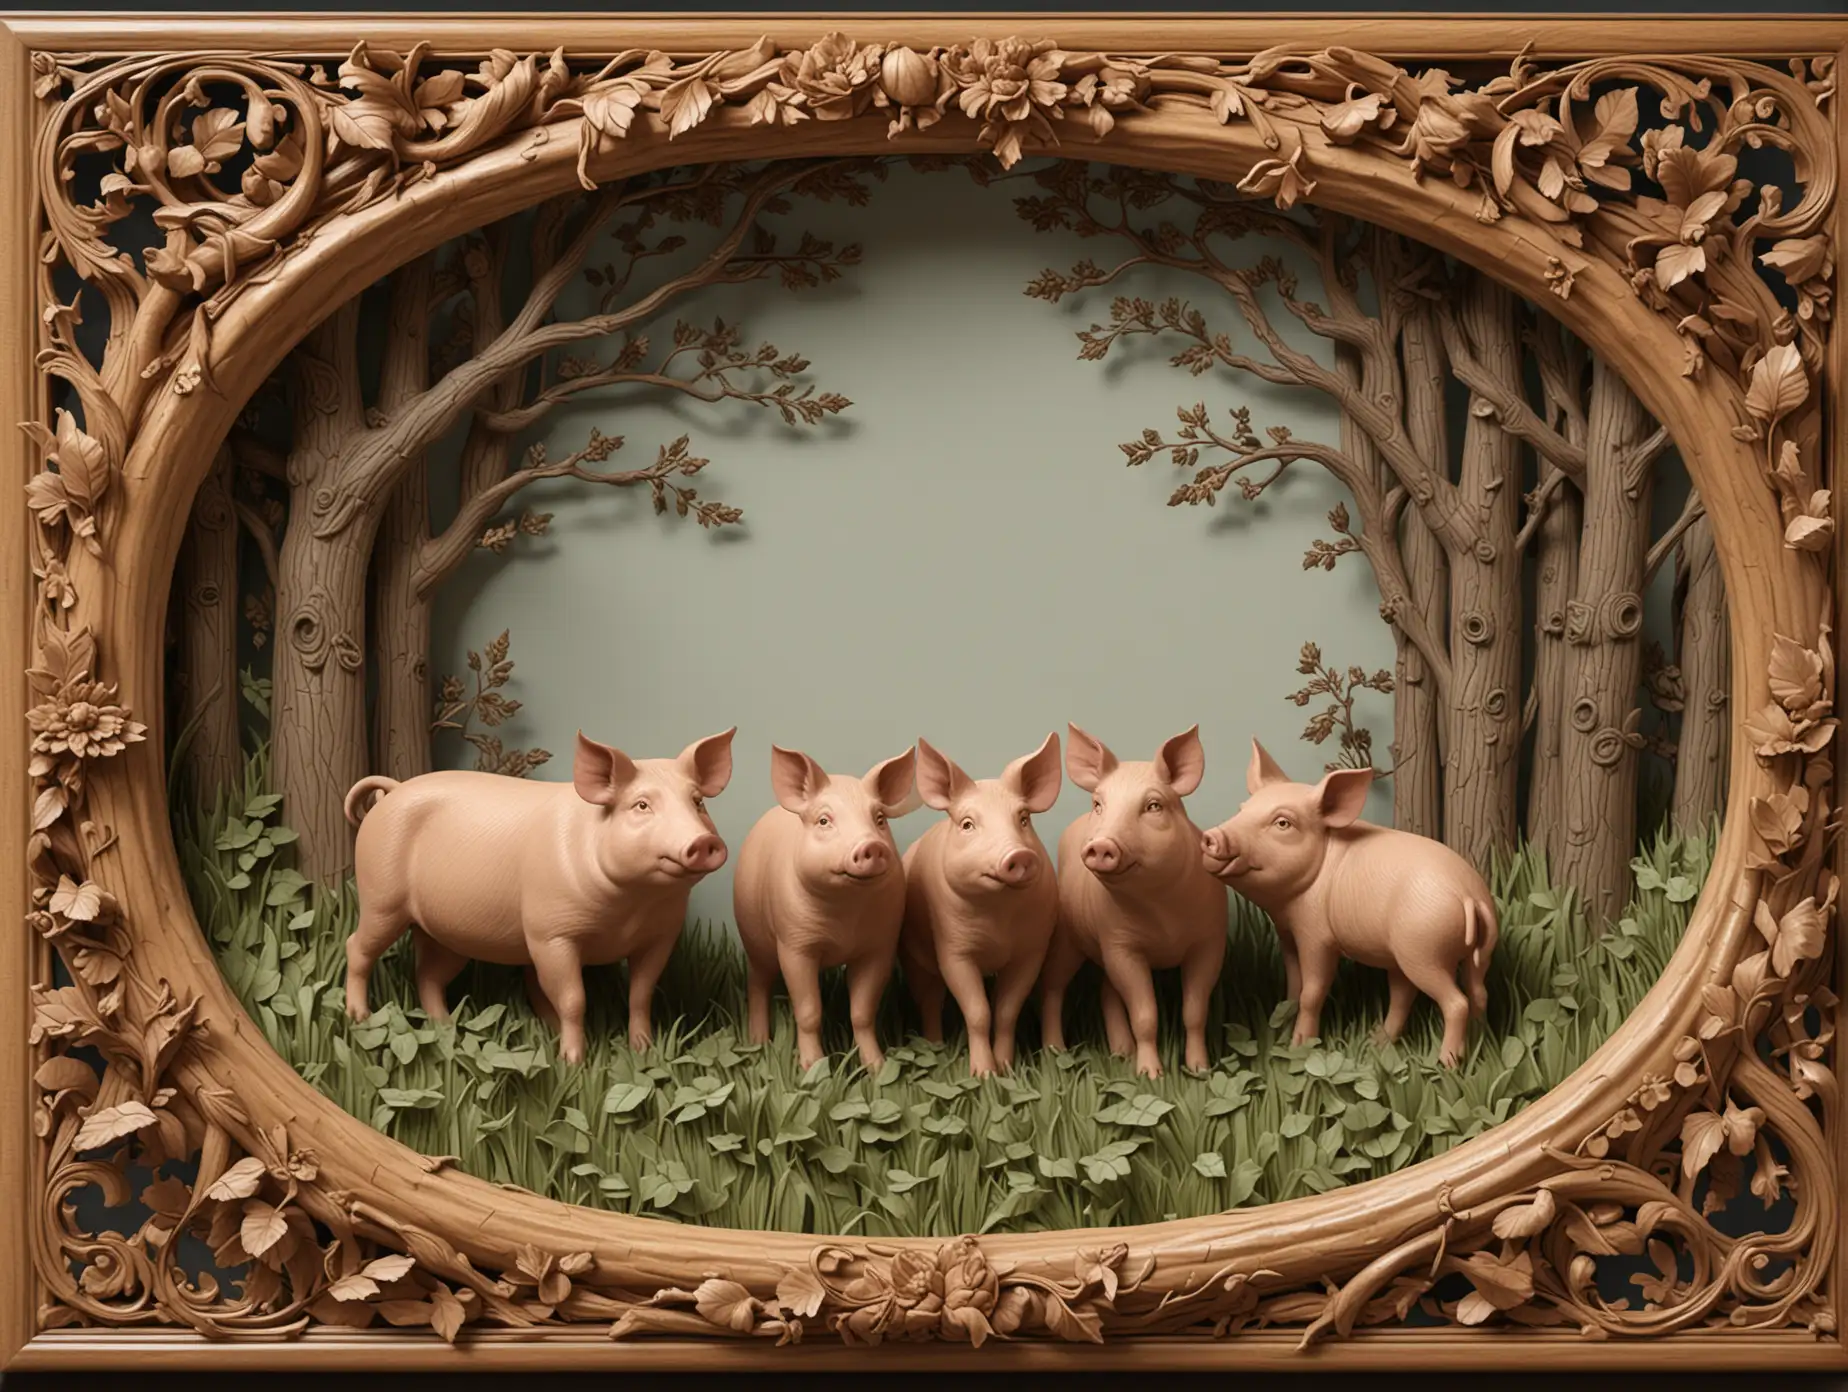 Exquisite-3D-Wood-Lacquer-Frame-The-Three-Little-Pigs-Carved-Scene-in-Aubrey-Beardsley-Style